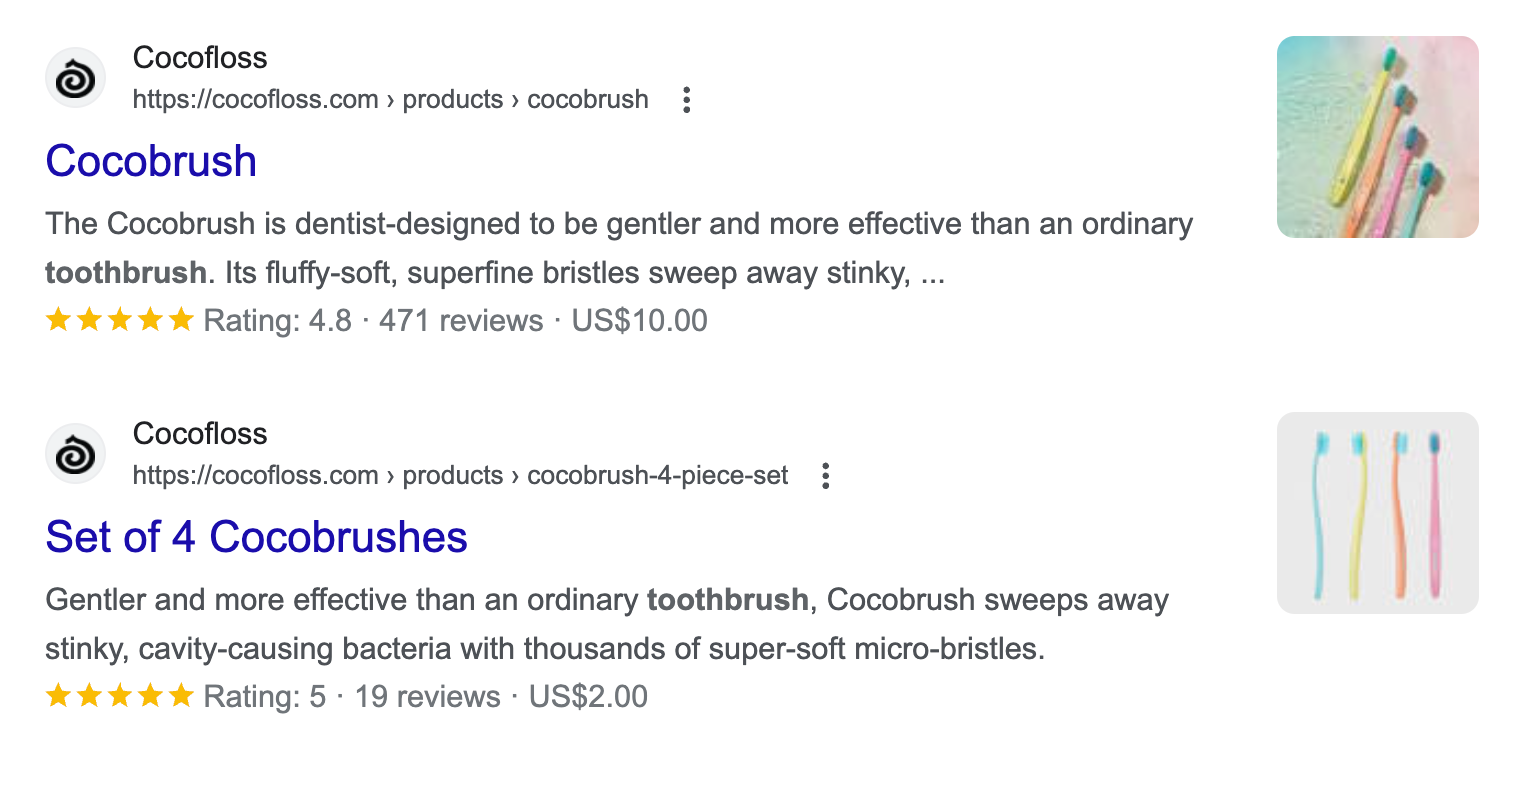 Two Google SERPs from brand Cocofloss